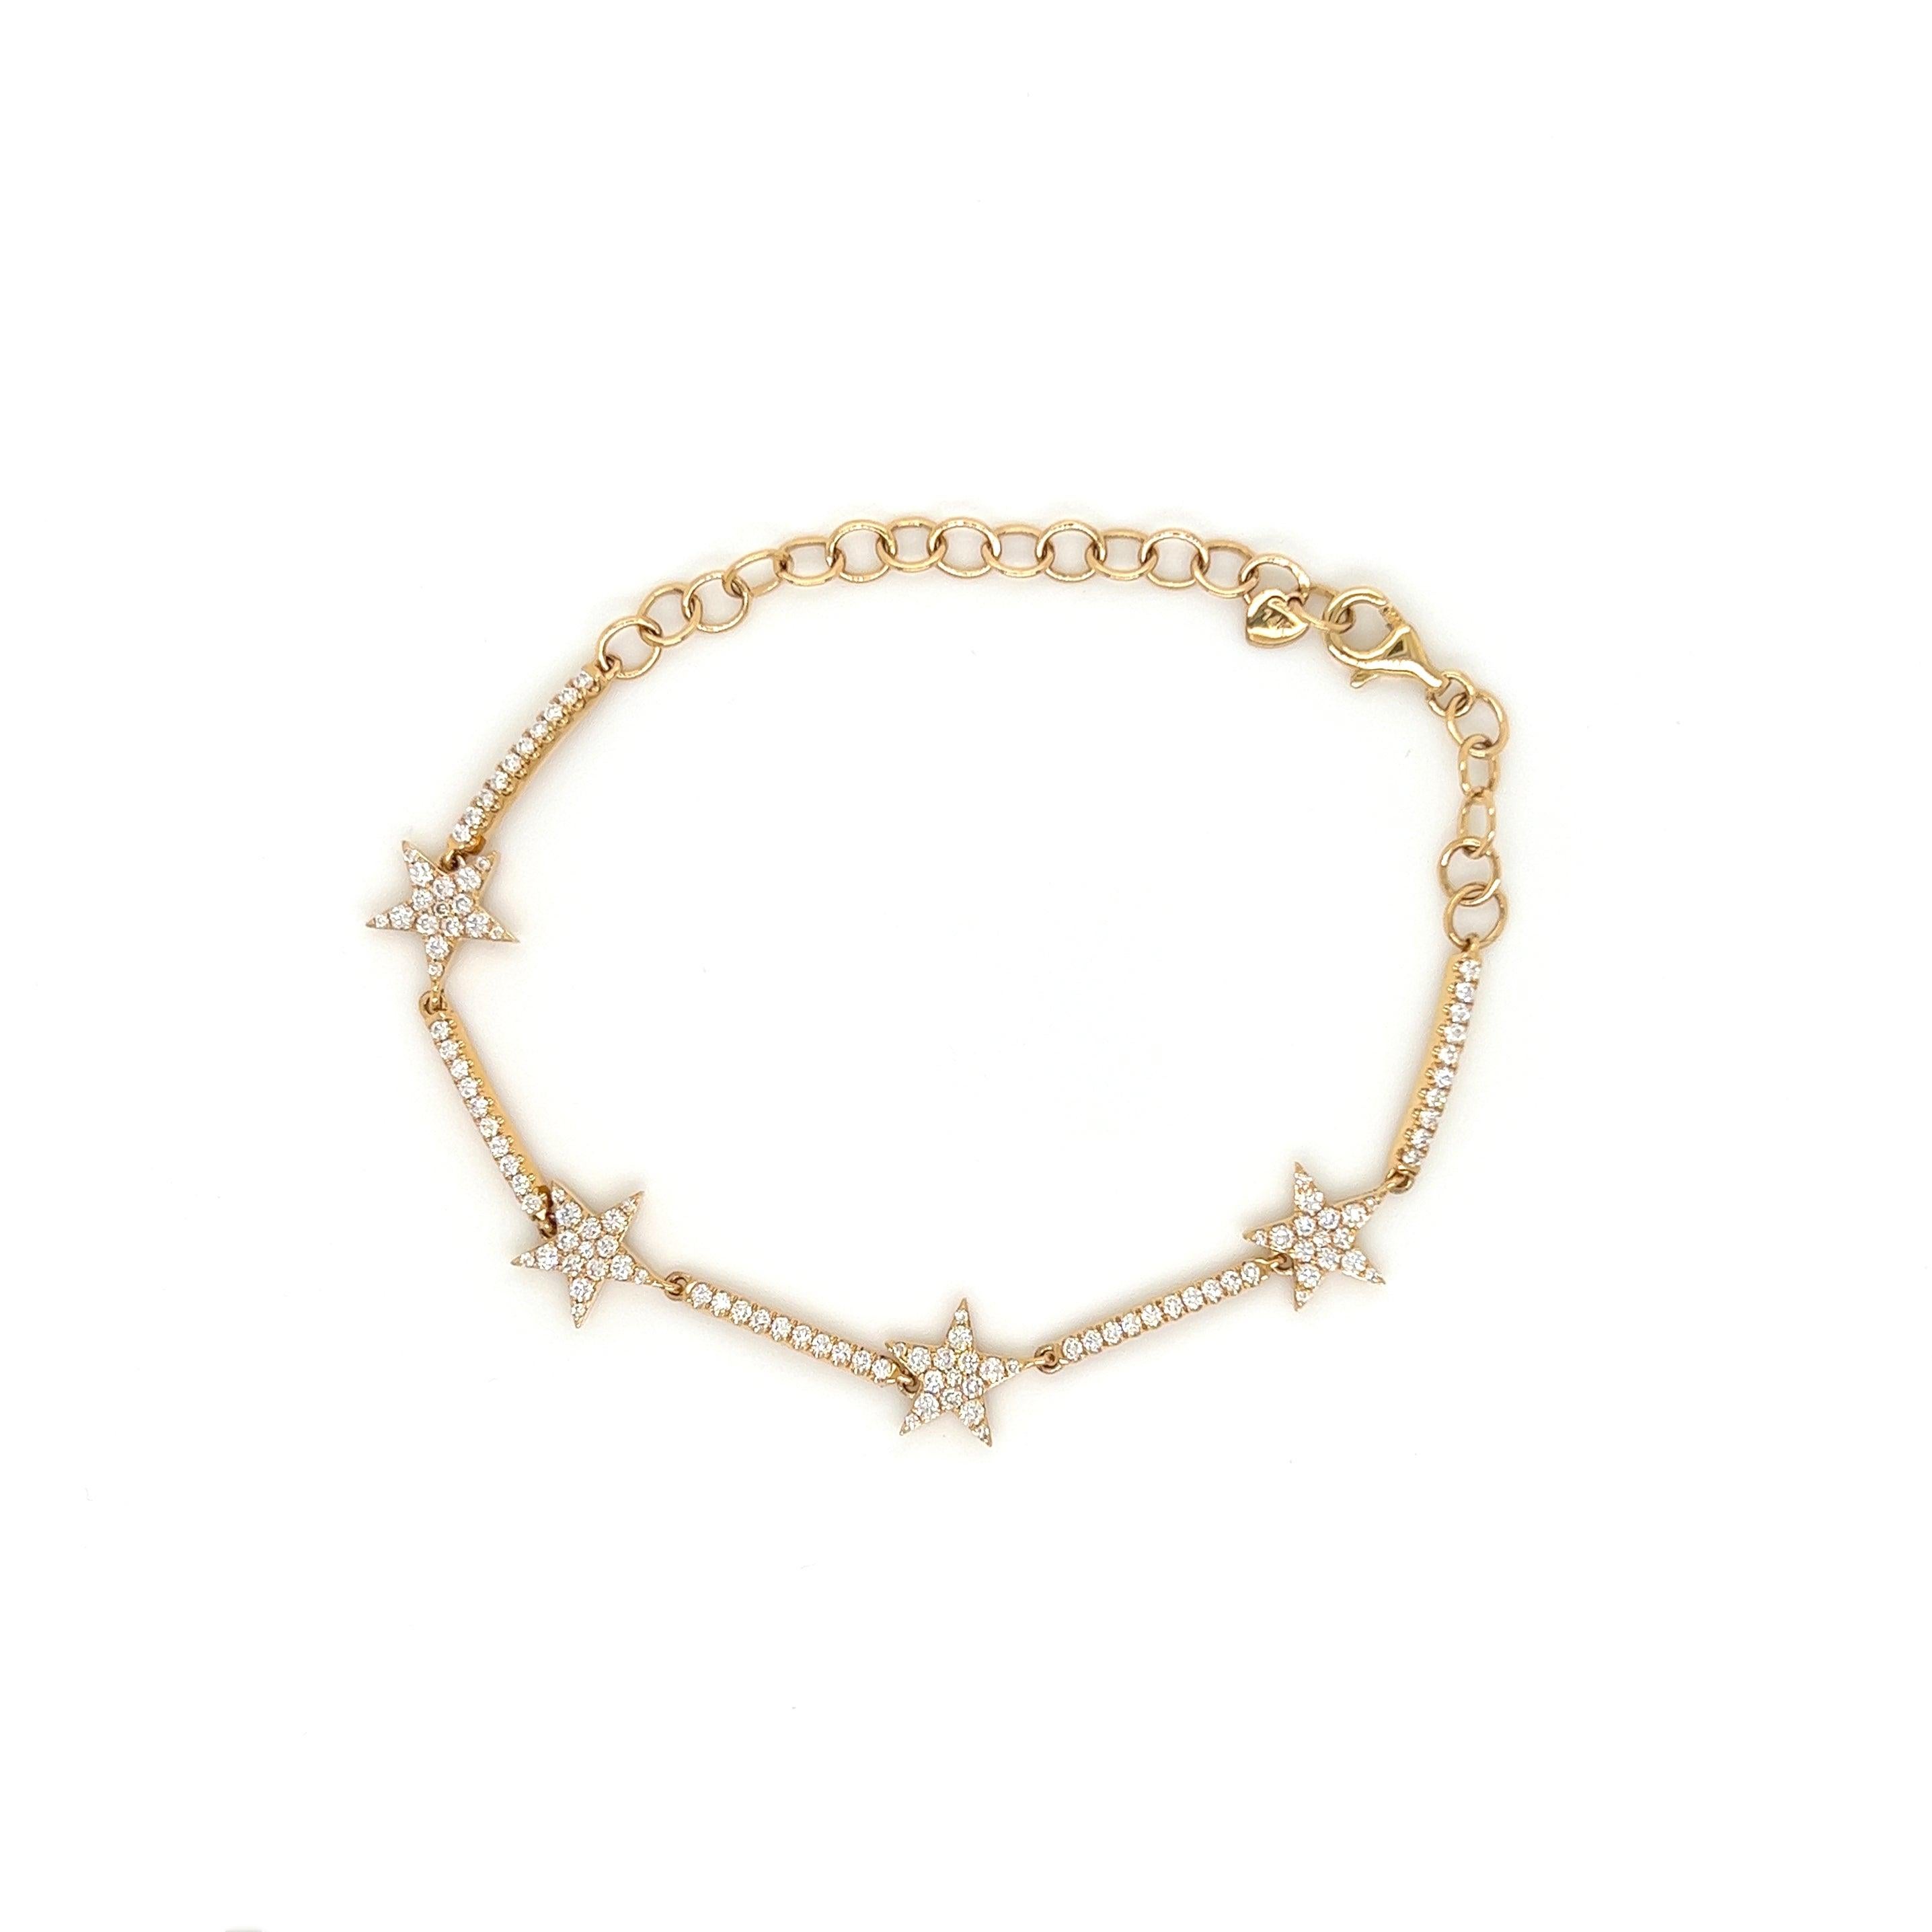 1.02CT Star Diamond Bracelet set in 14K Yellow Gold In New Condition For Sale In New York, NY